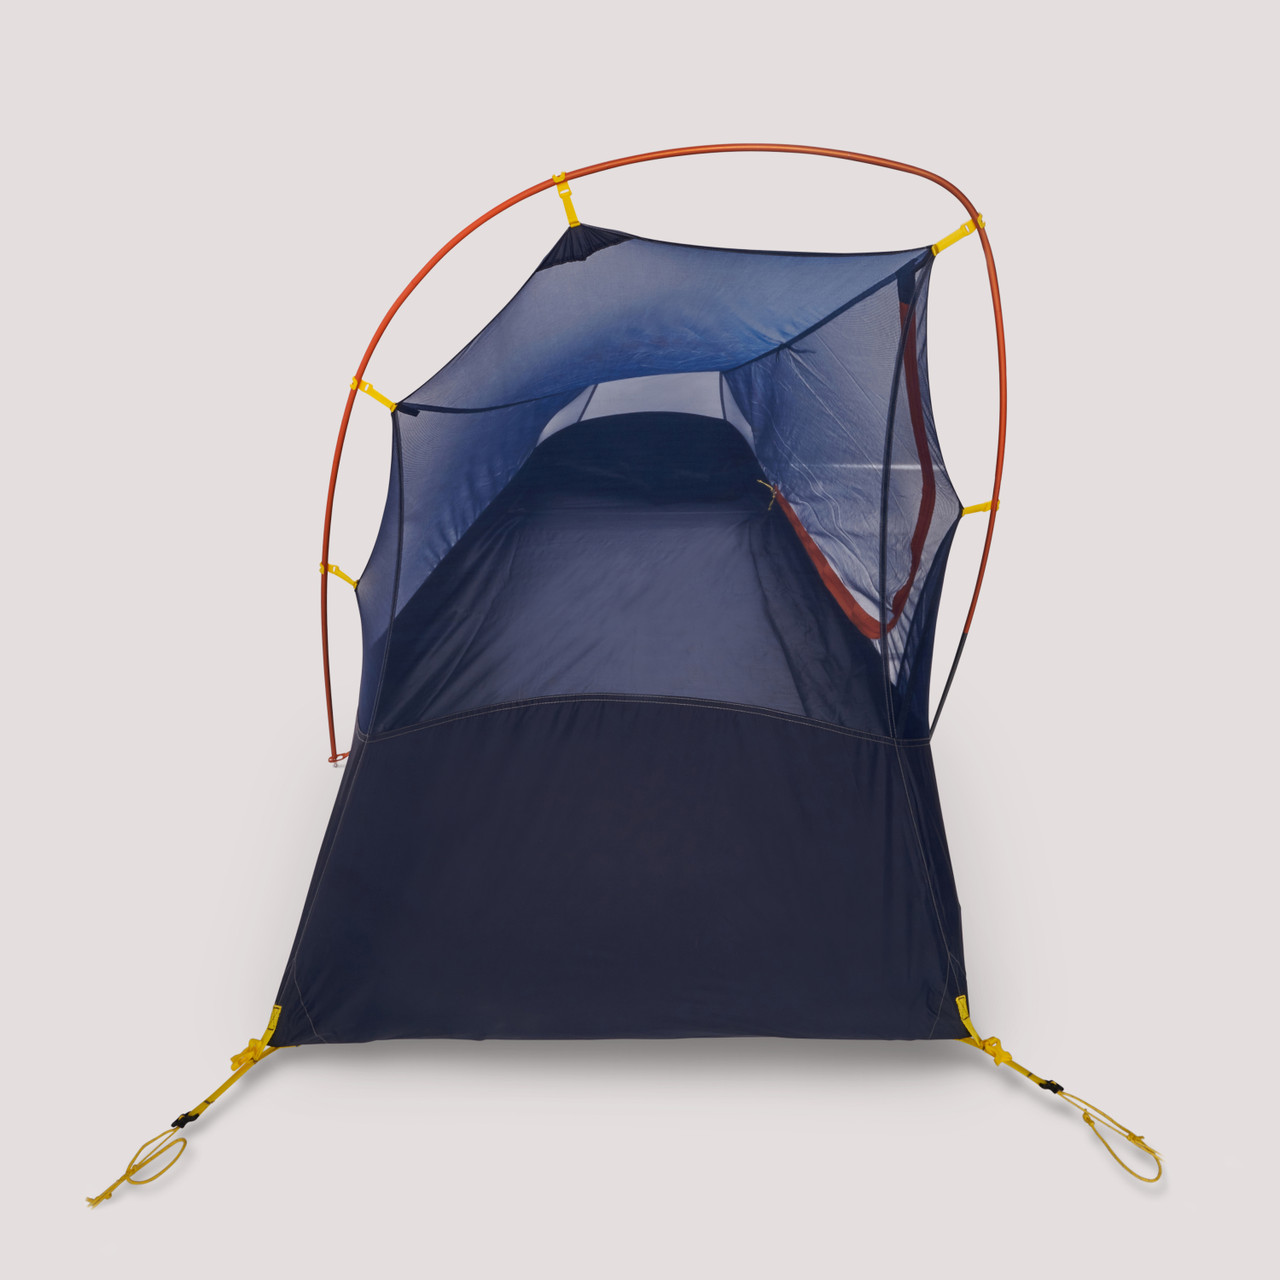 Sierra Designs High Side 1 Tent Review 